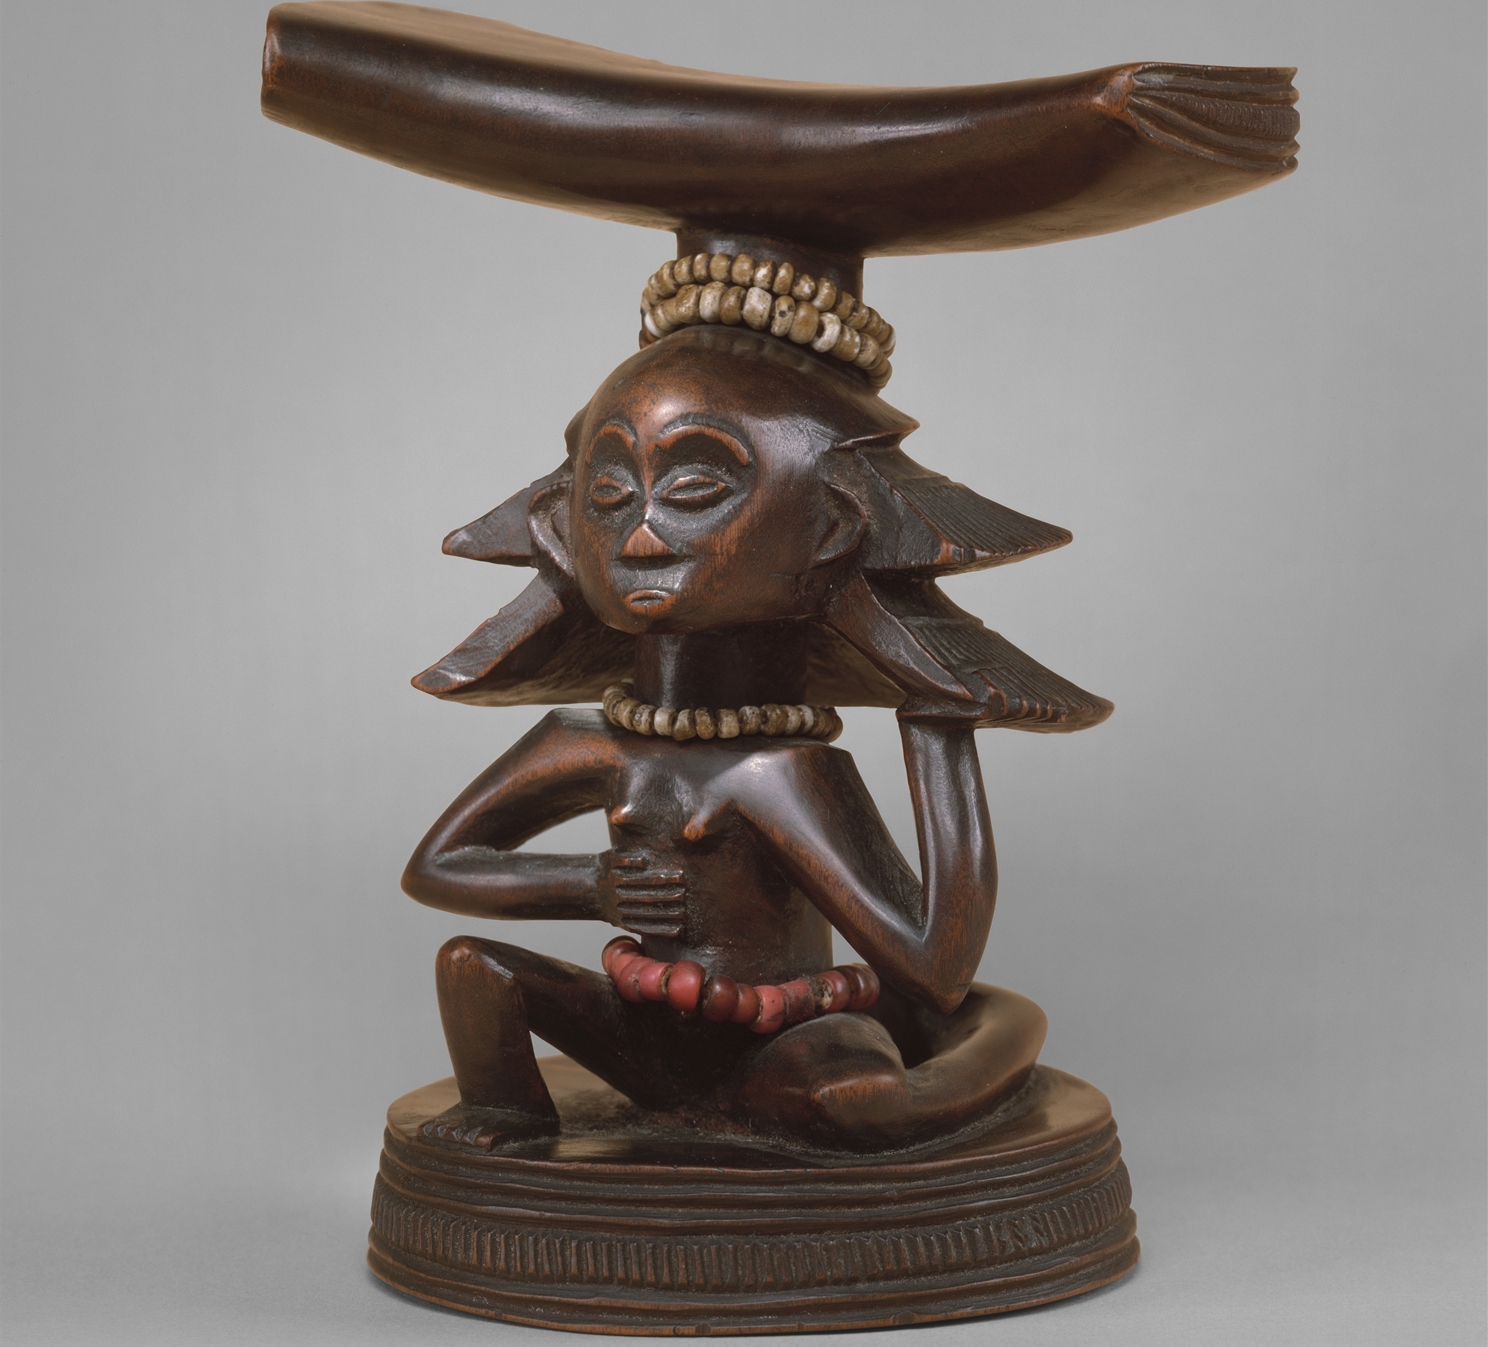 This headrest, which depicts a female caryatid figure, was sculpted an artist from the Luba people in the modern day Democratic Republic of the Congo in the nineteenth-century.